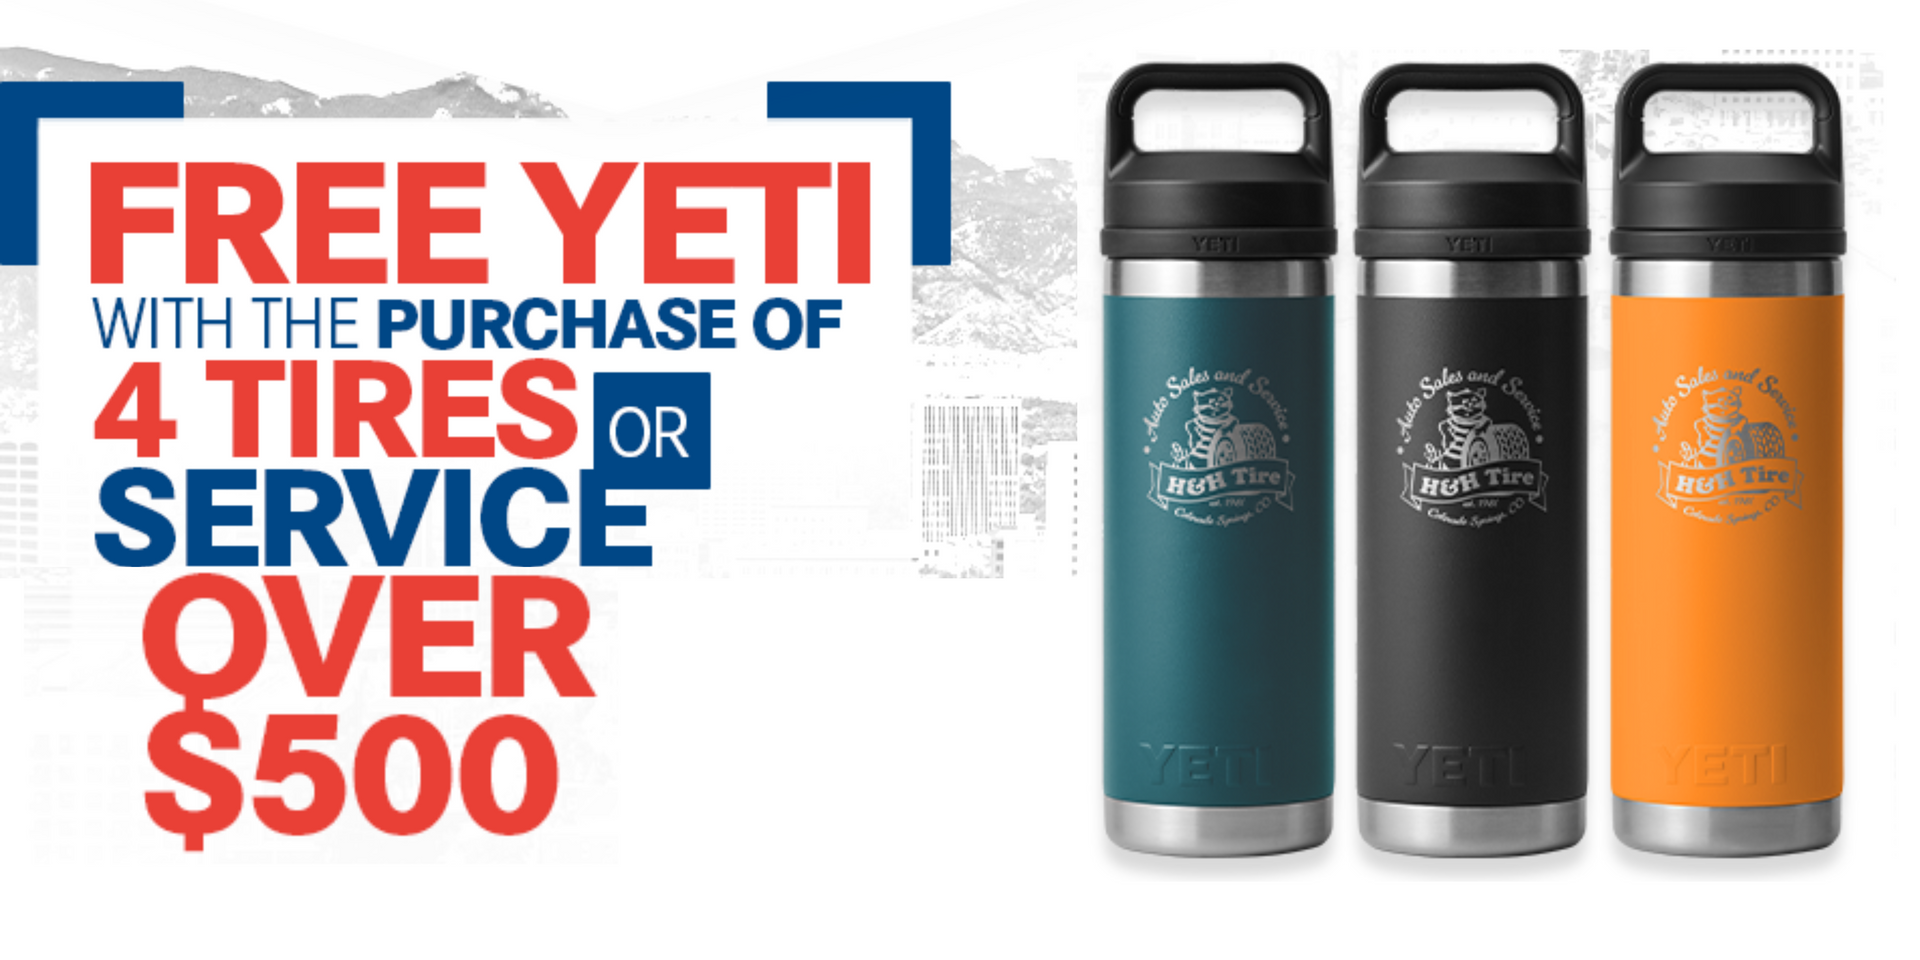 Free Yeti with the purchase of 4 tires or service over $500